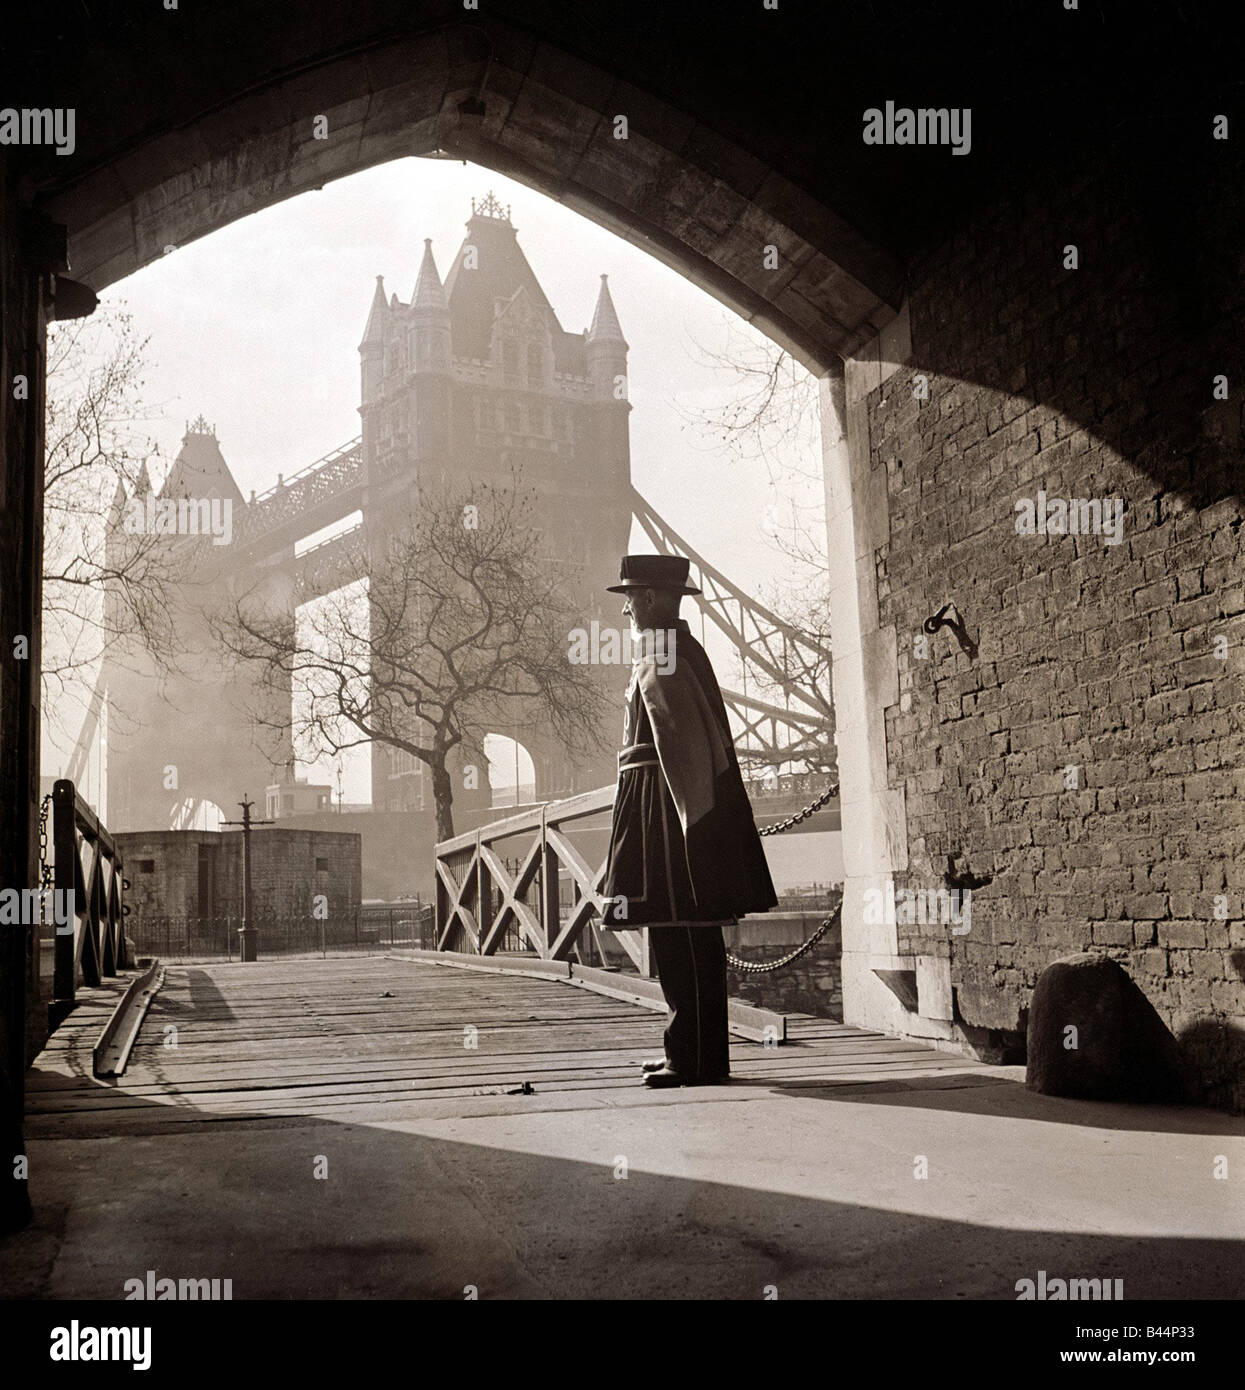 A beefeater guards the entrance to the Tower of London circa 1950s Stock Photo